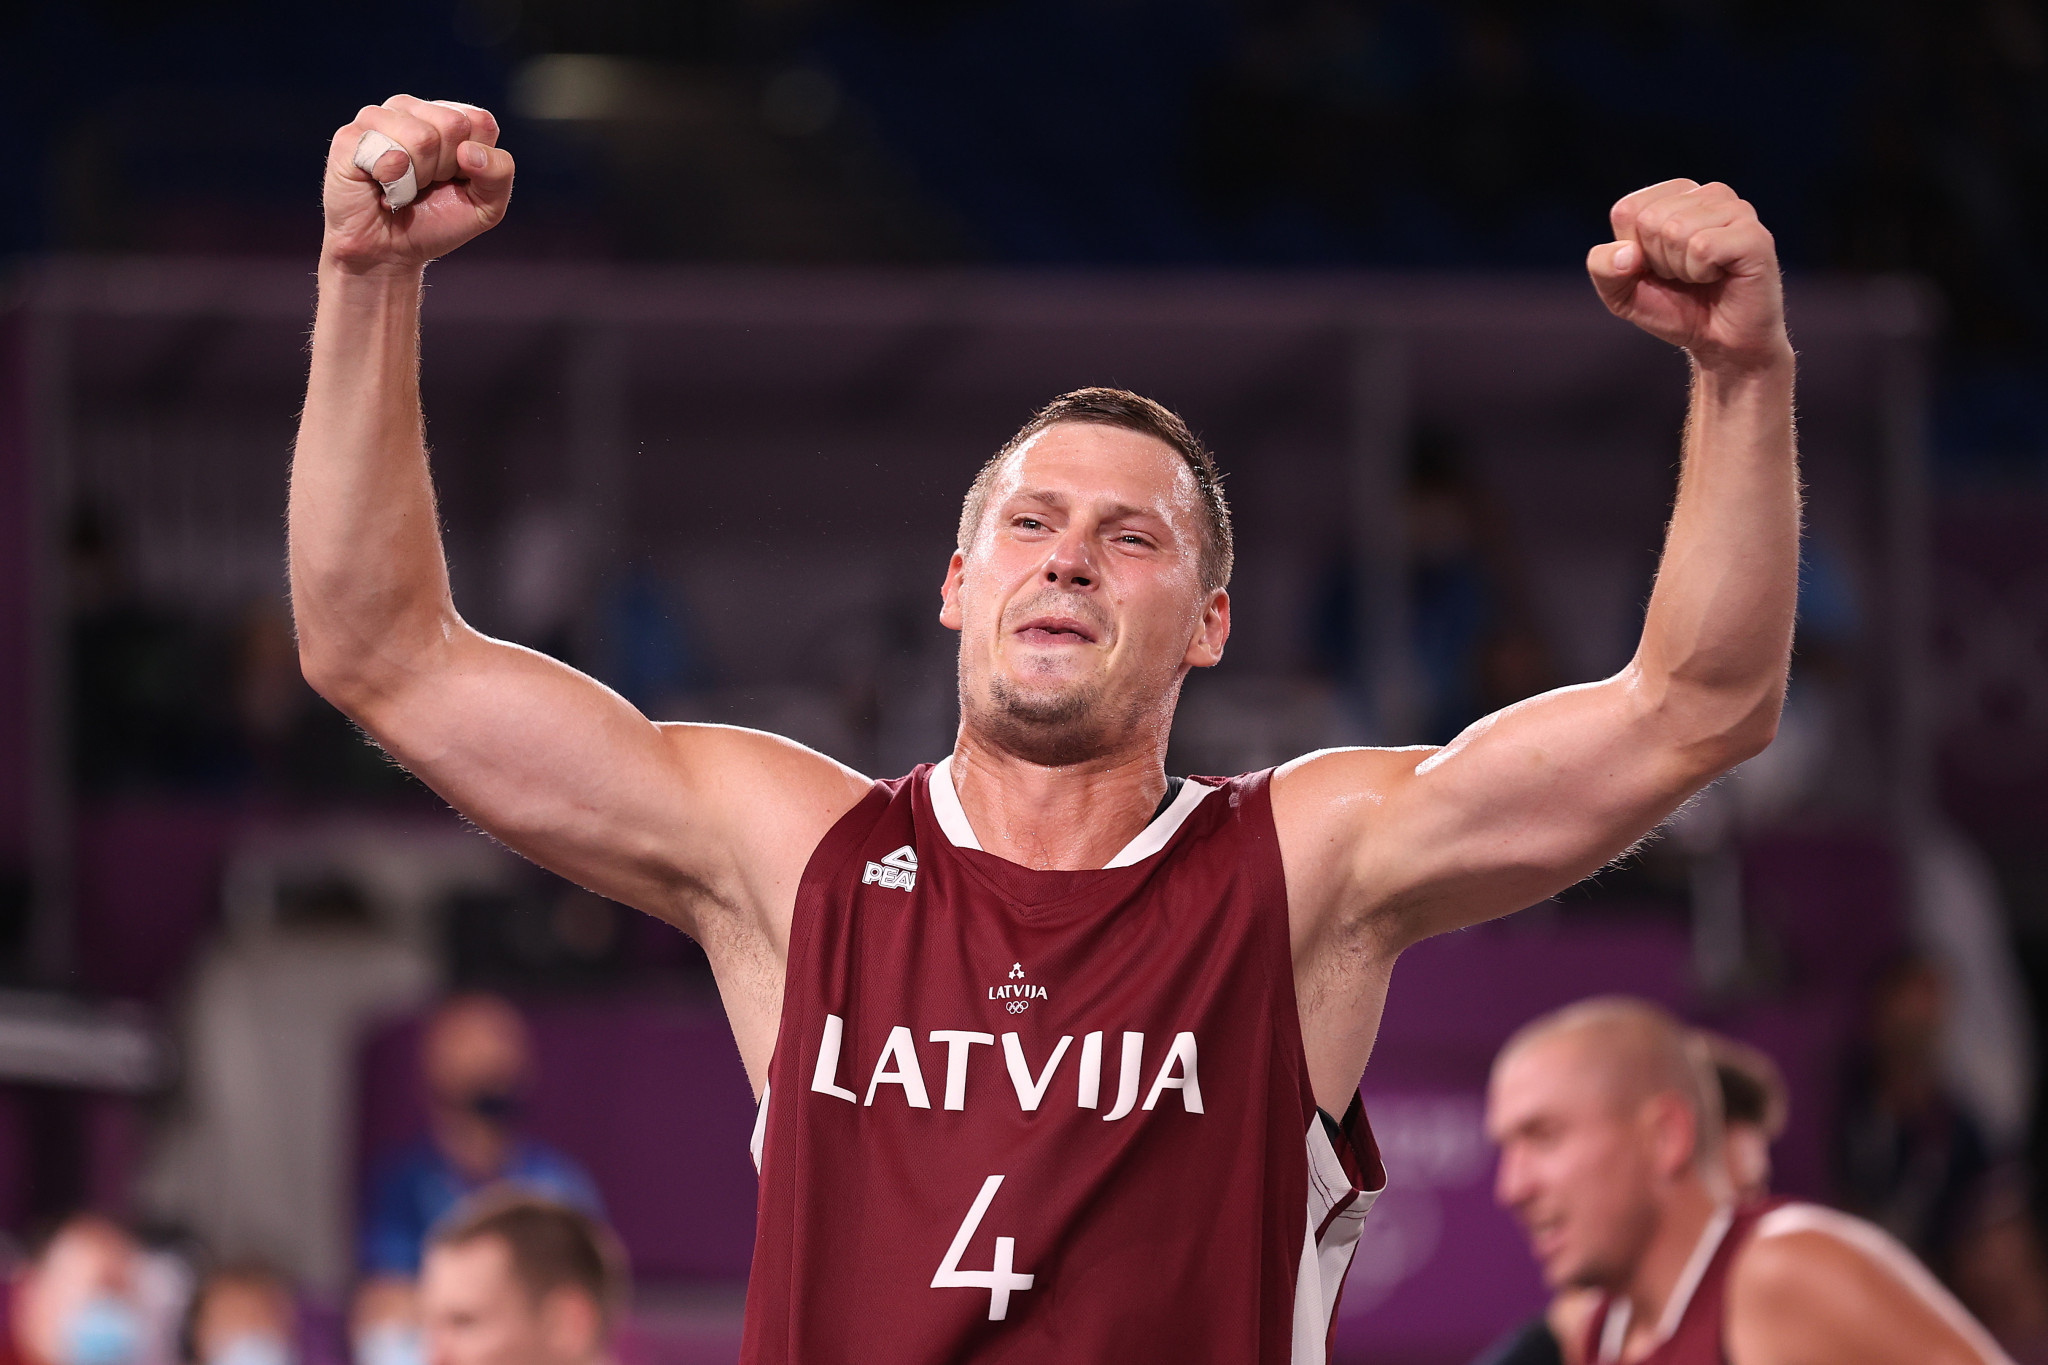 Two members of Riga's quartet for the FIBA 3x3 World Tour event in Utsunomiya won gold at the Tokyo 2020 Olympics ©Getty Images